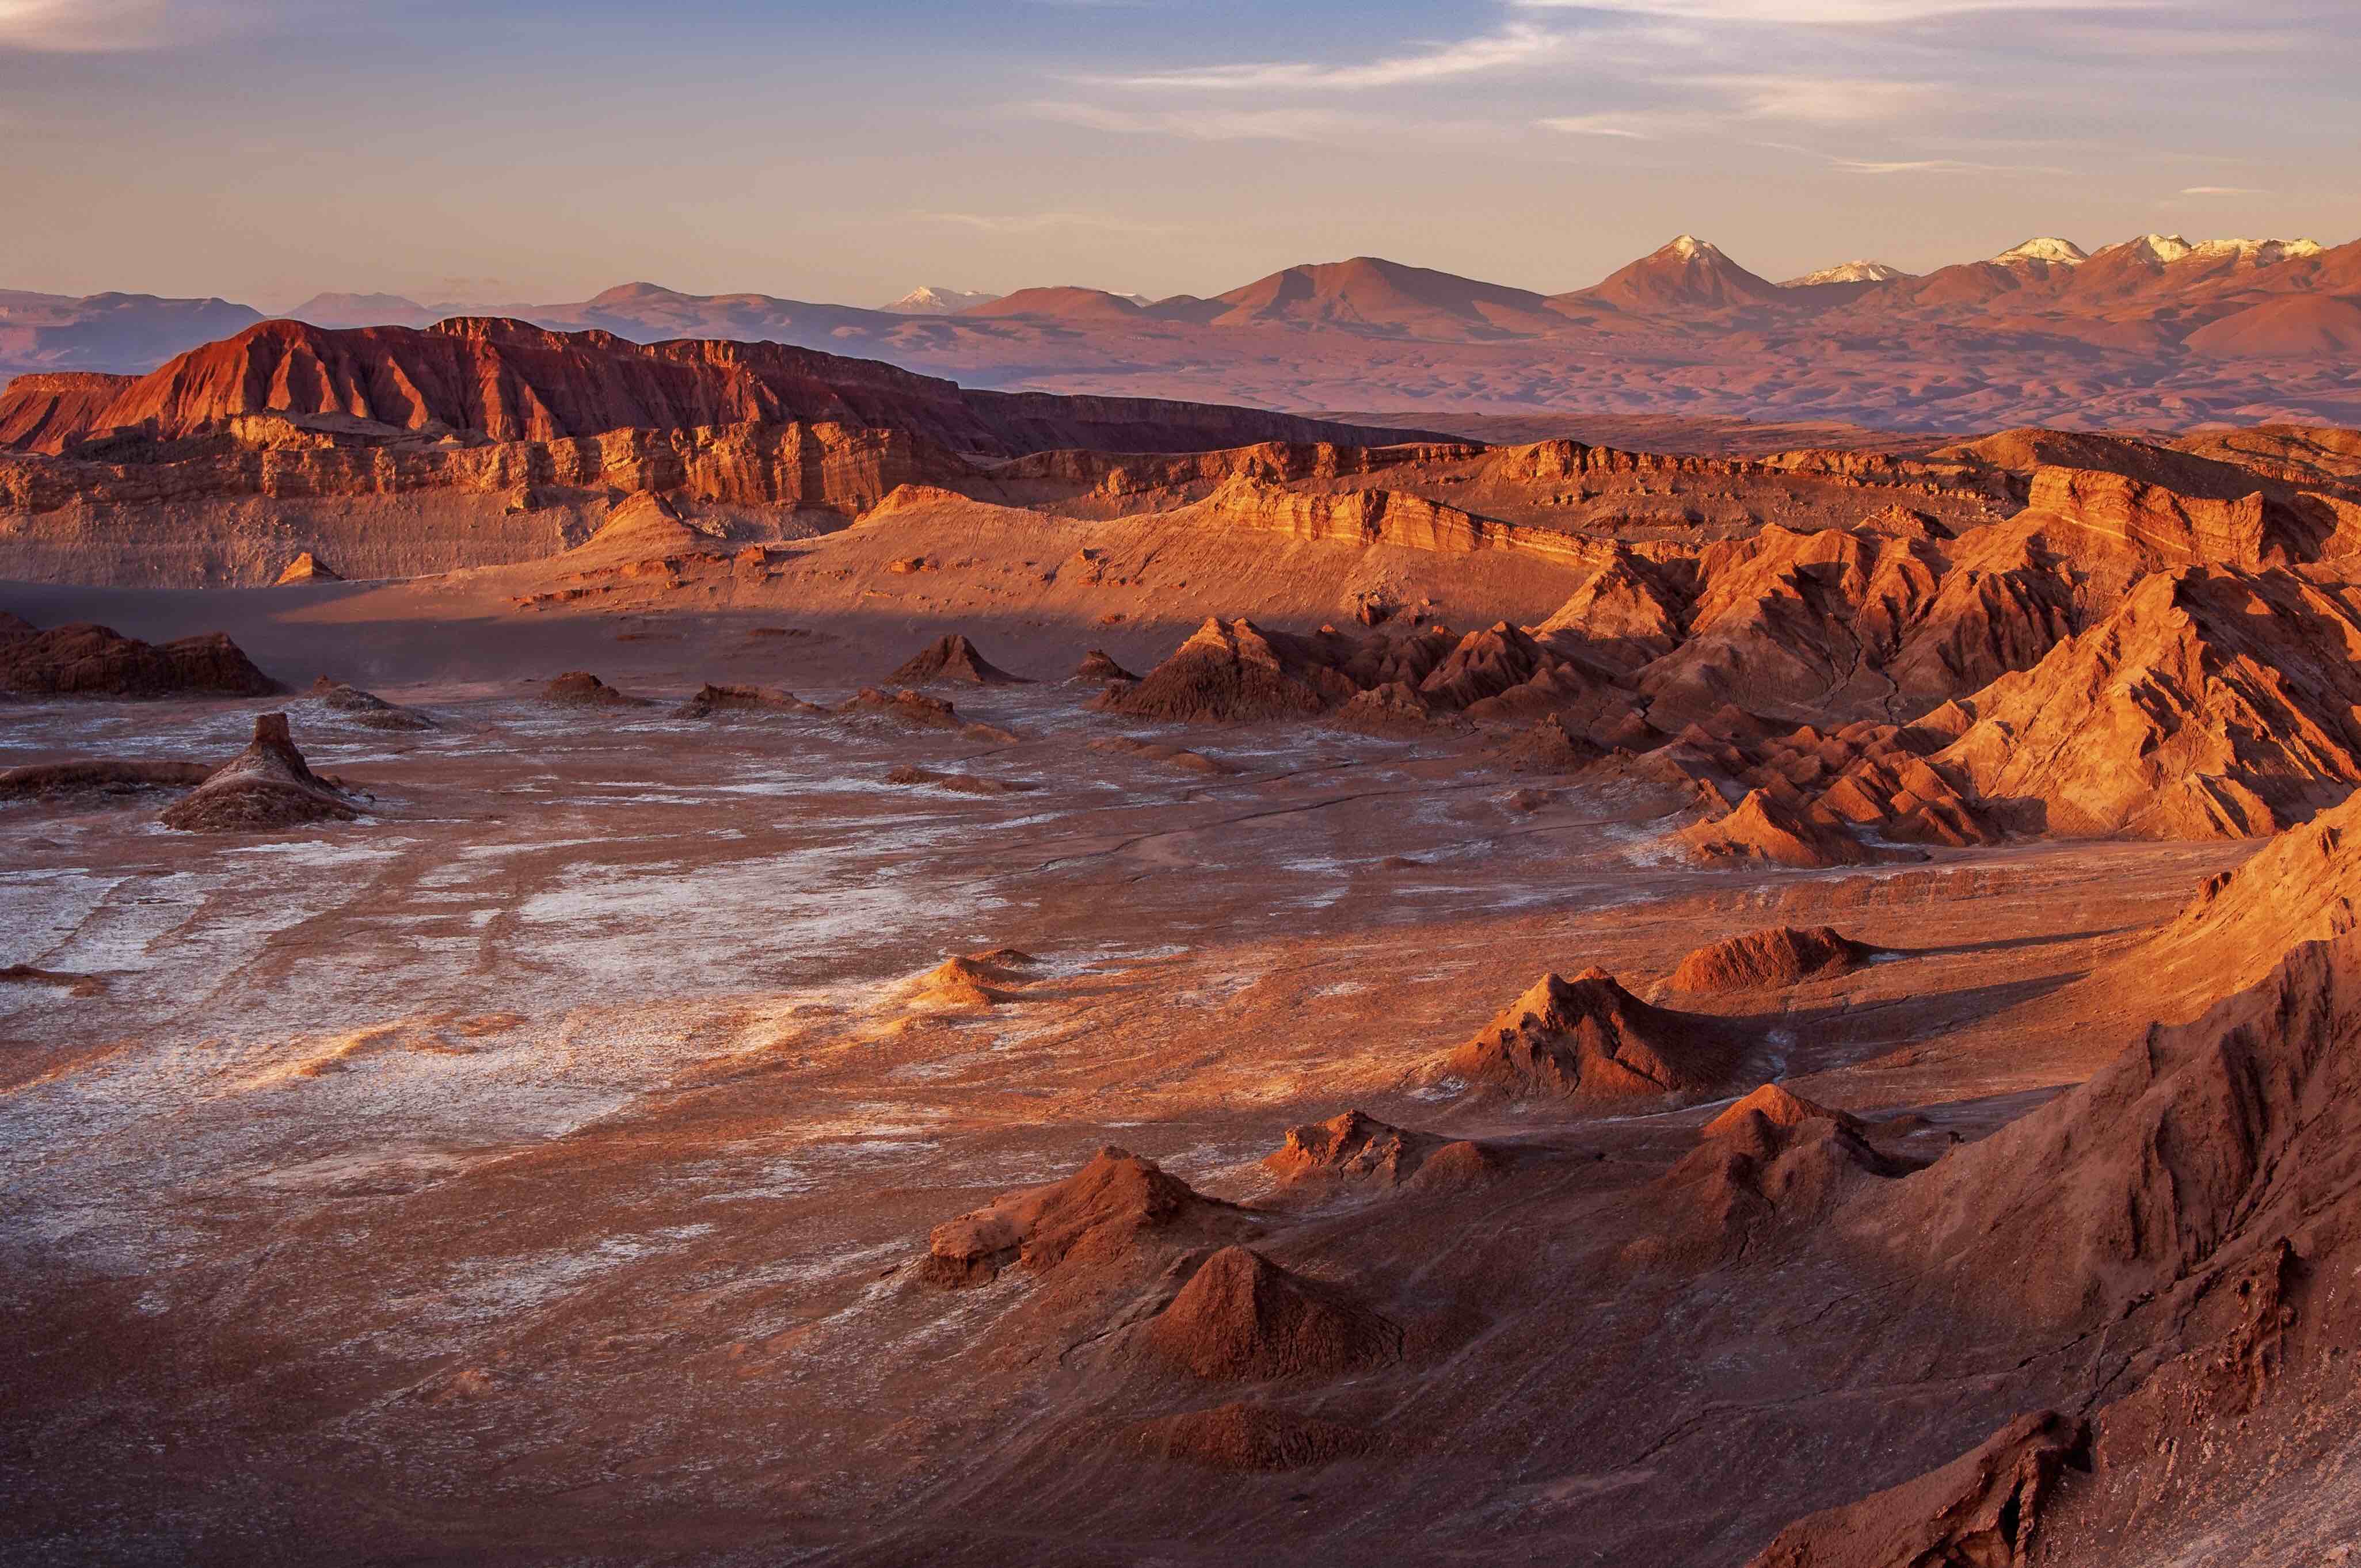 The Valley of the Moon in the Atacama Desert. Known for its